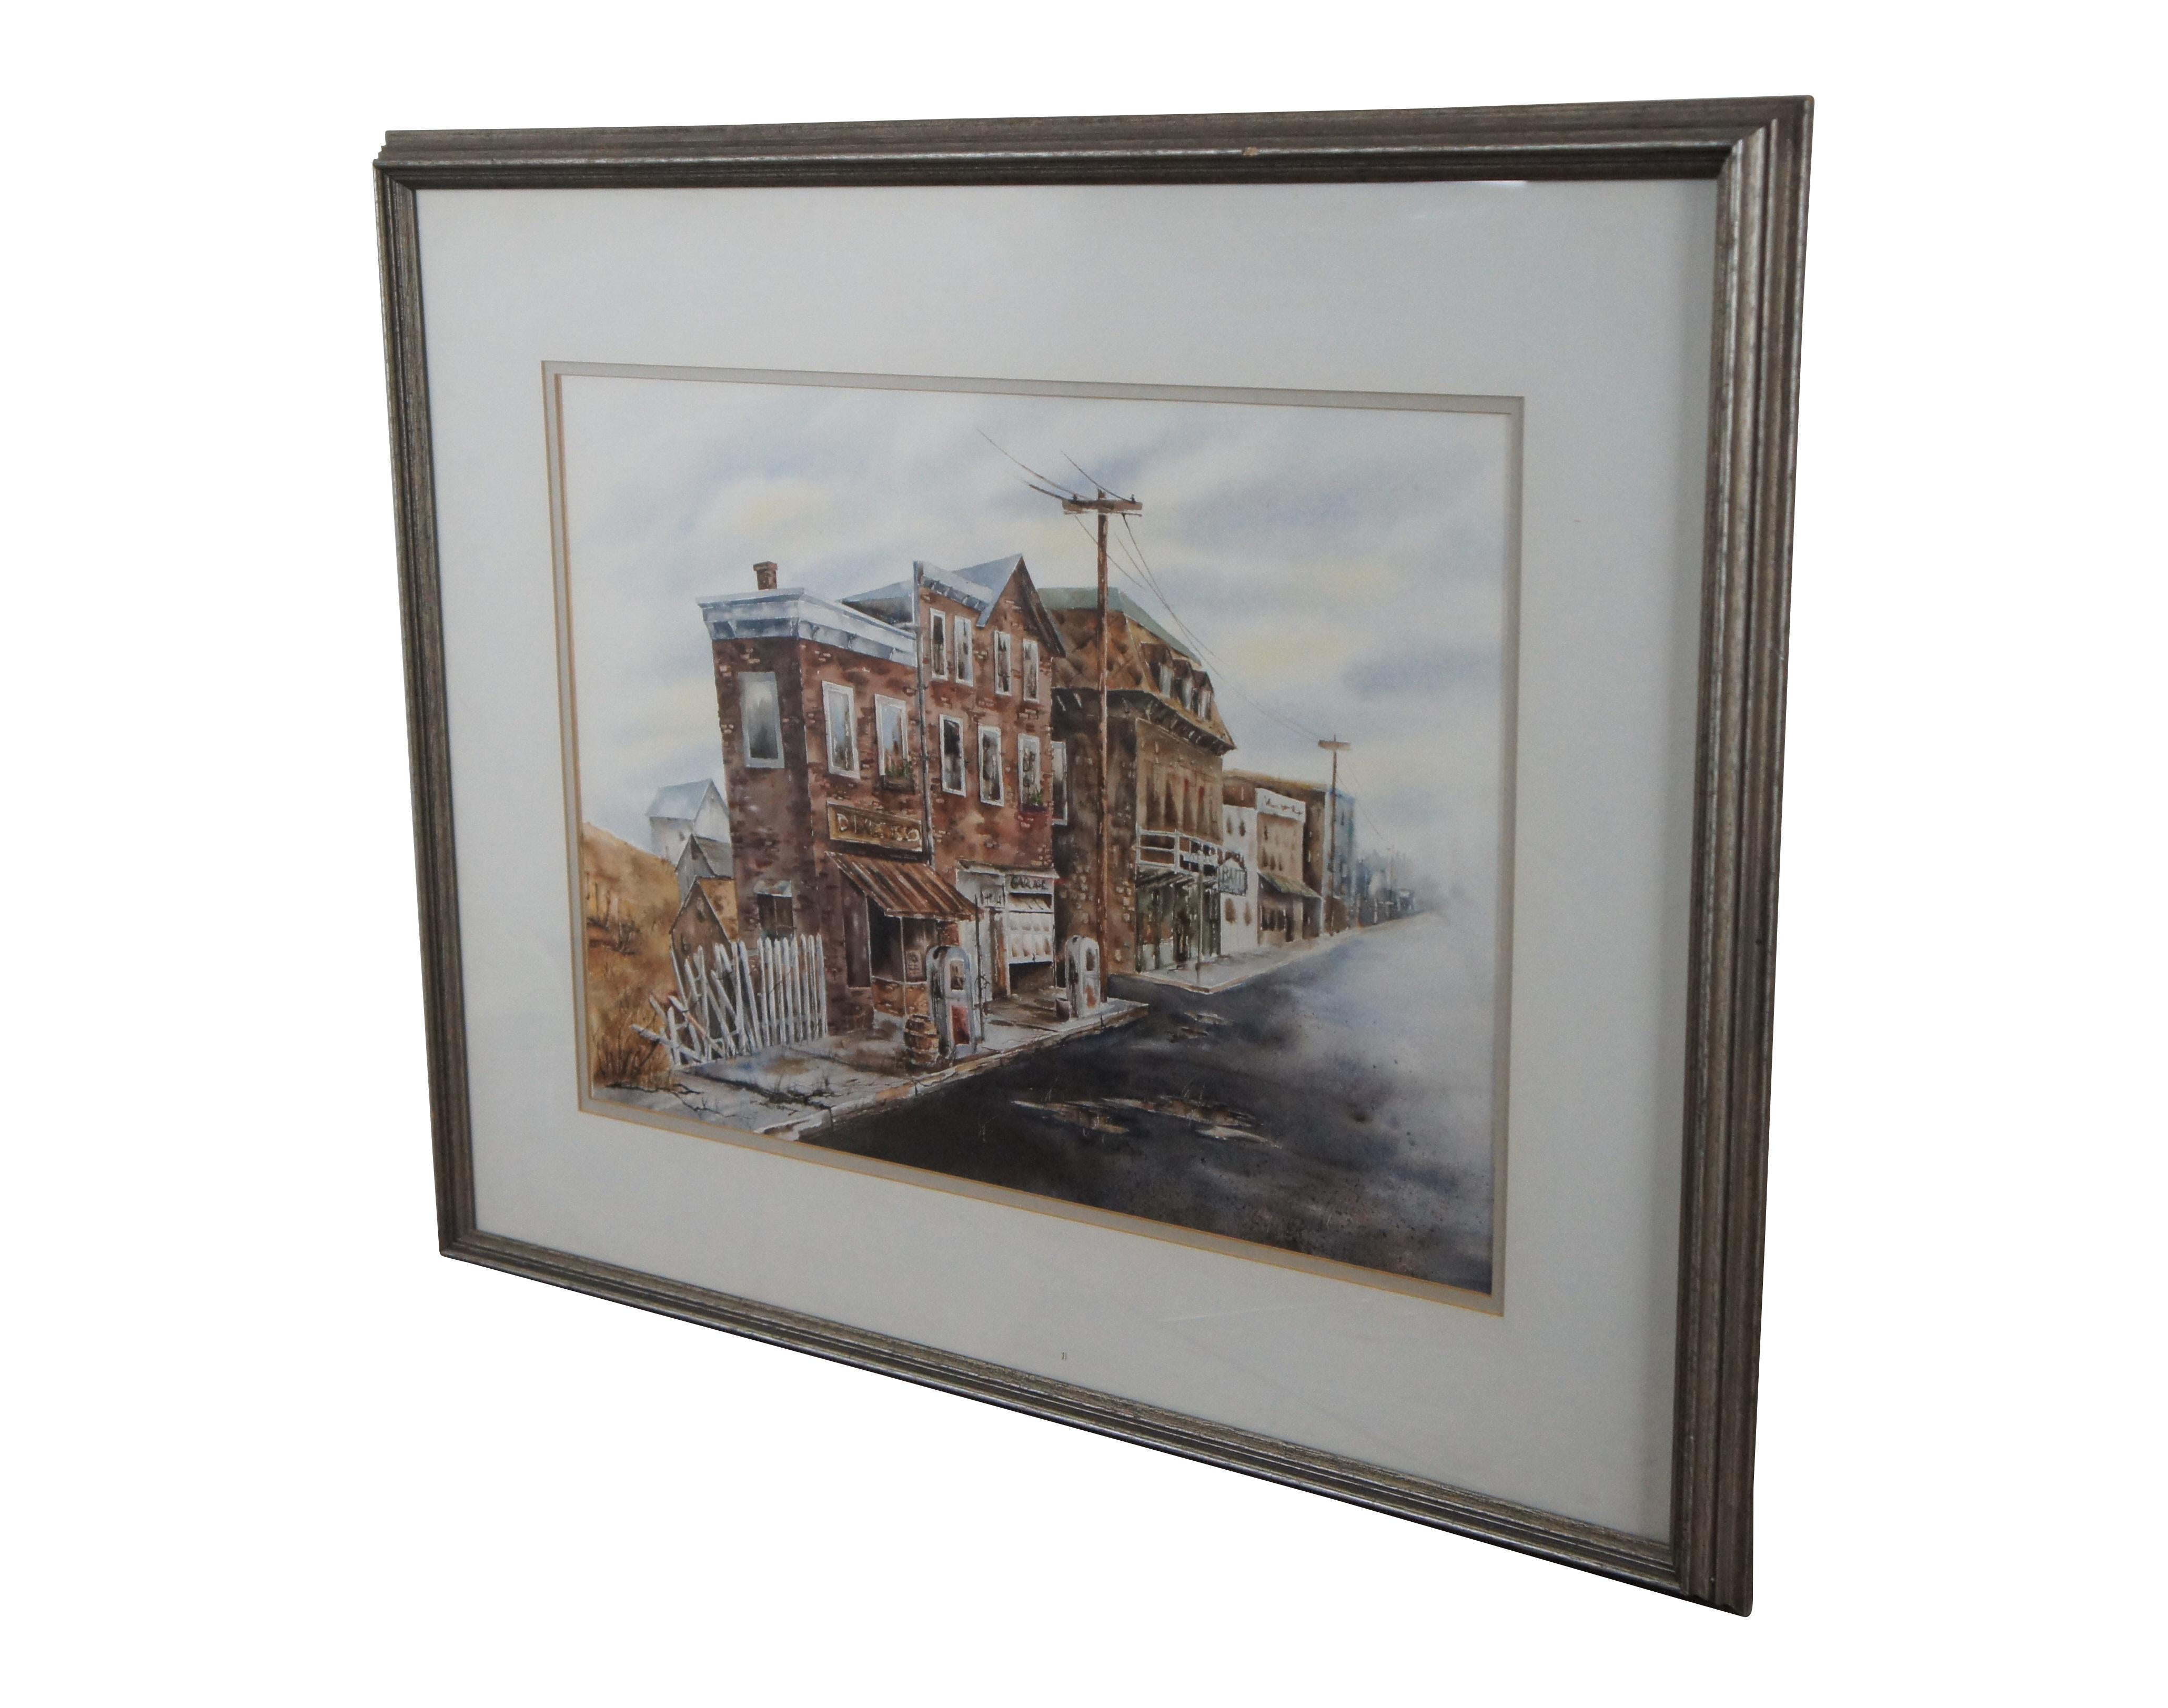 Vintage watercolor painting depicting a run down stretch of Dixie Highway or US 150. No signature. Framed in a lightly distressed, silver gilt frame with raised bevel. 

Dimensions:
29.5